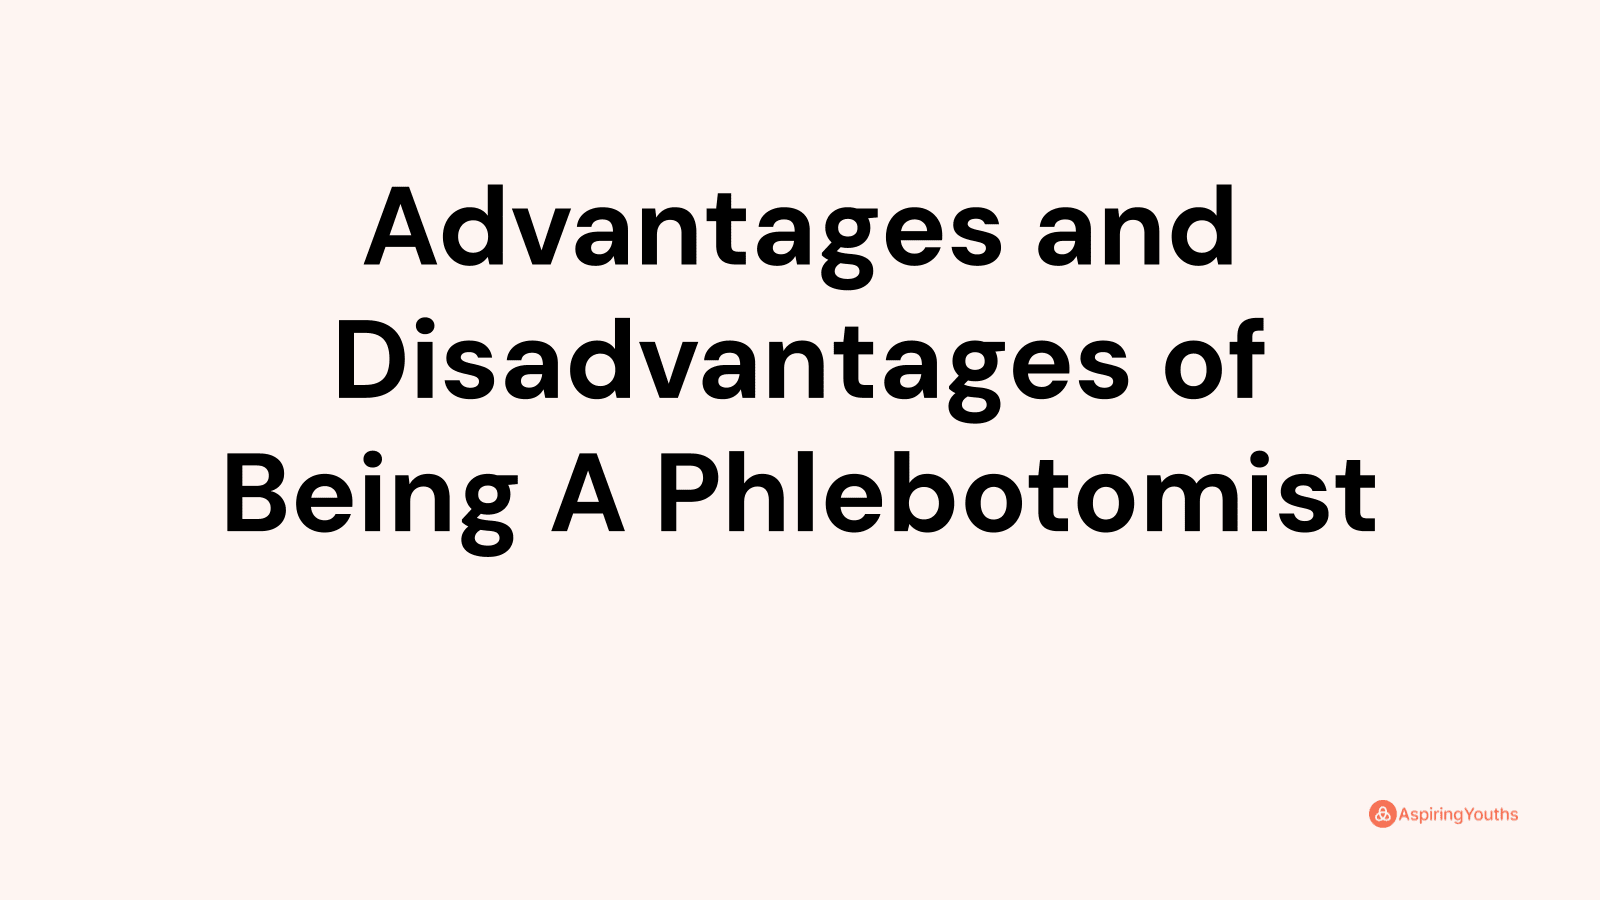 Advantages and disadvantages of Being A Phlebotomist